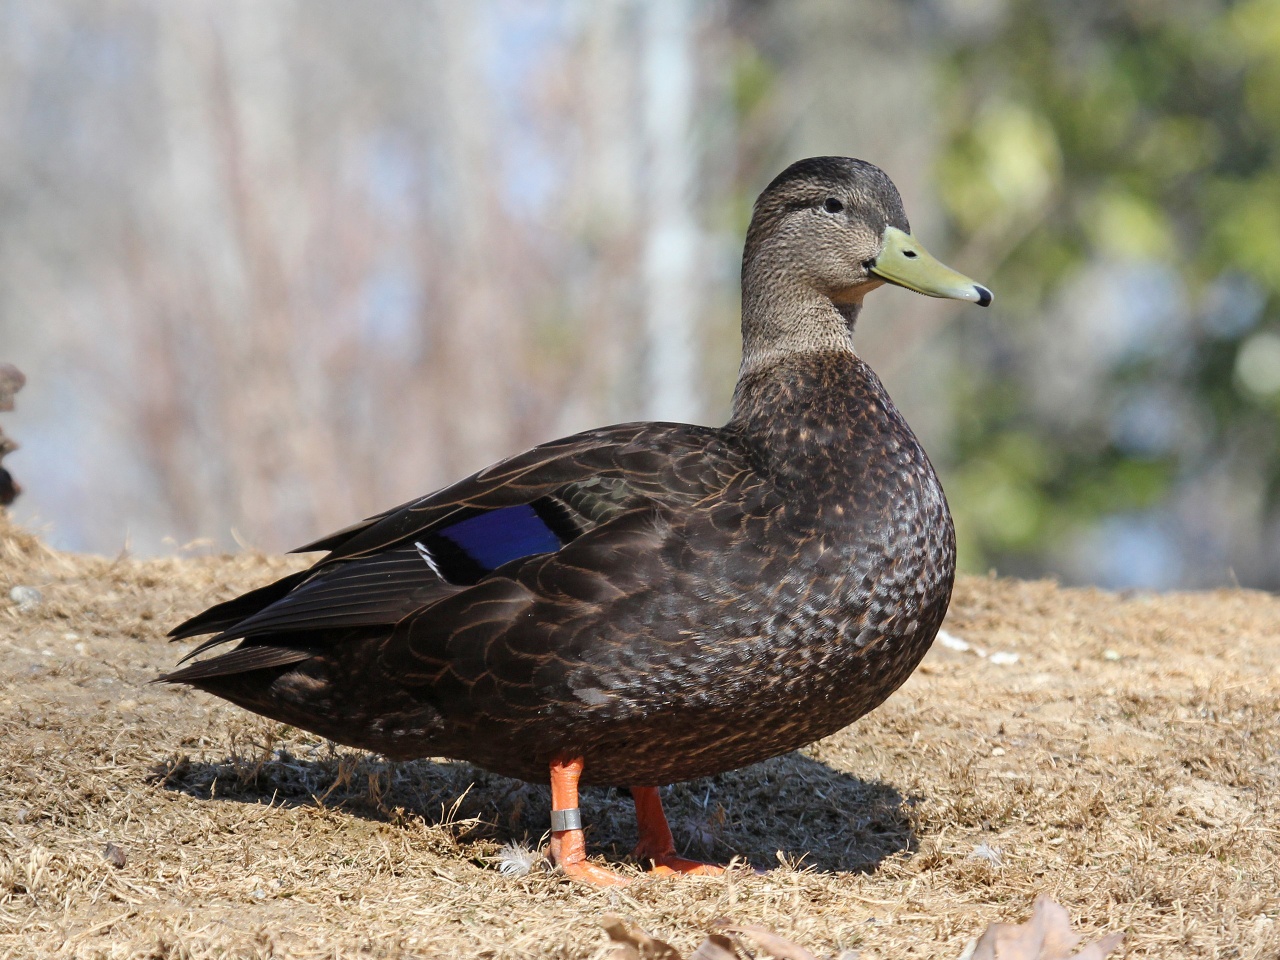 Canard noir - Anas rubripes - <a href='https://commons.wikimedia.org/wiki/File:American_Black_Duck_male_RWD5.jpg'>DickDaniels  (http://carolinabirds.org/)</a>, <a href='https://creativecommons.org/licenses/by-sa/3.0'>CC BY-SA 3.0</a>, via Wikimedia Commons - BioObs